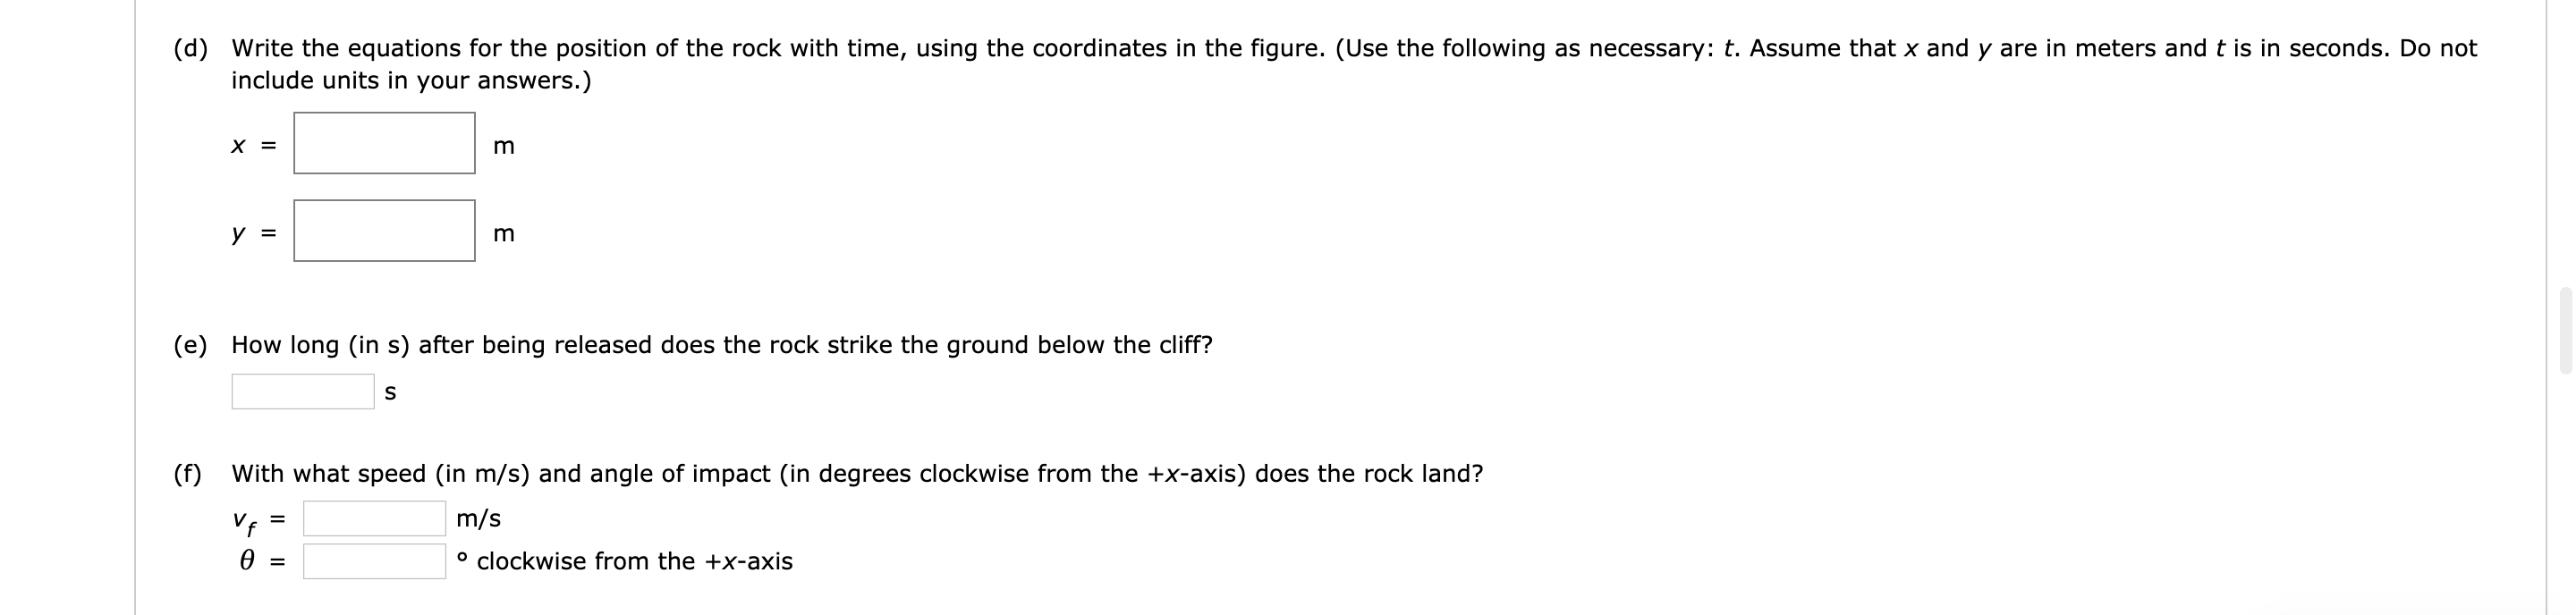 (d) Write the equations for the position of the rock with time, using the coordinates in the figure. (Use the following as necessary: t. Assume that x and y are in meters and t is in seconds. Do not
include units in your answers.)
х 3
(e) How long (in s) after being released does the rock strike the ground below the cliff?
With what speed (in m/s) and angle of impact (in degrees clockwise from the +x-axis) does the rock land?
(f)
m/s
° clockwise from the +x-axis
ө
